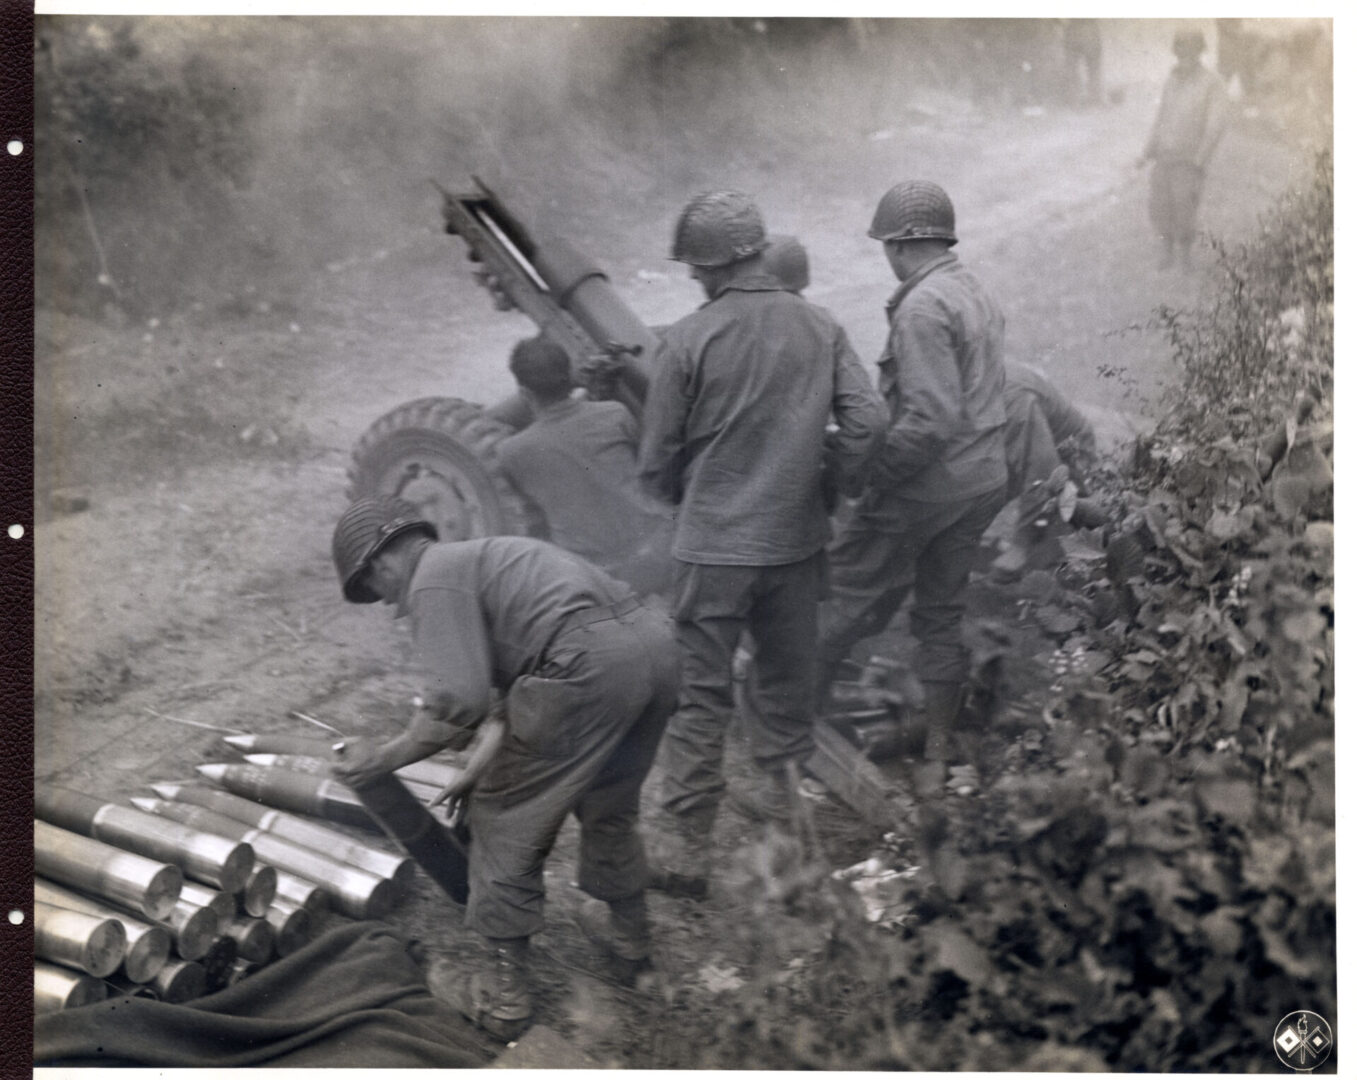 American troops shelling the German forces